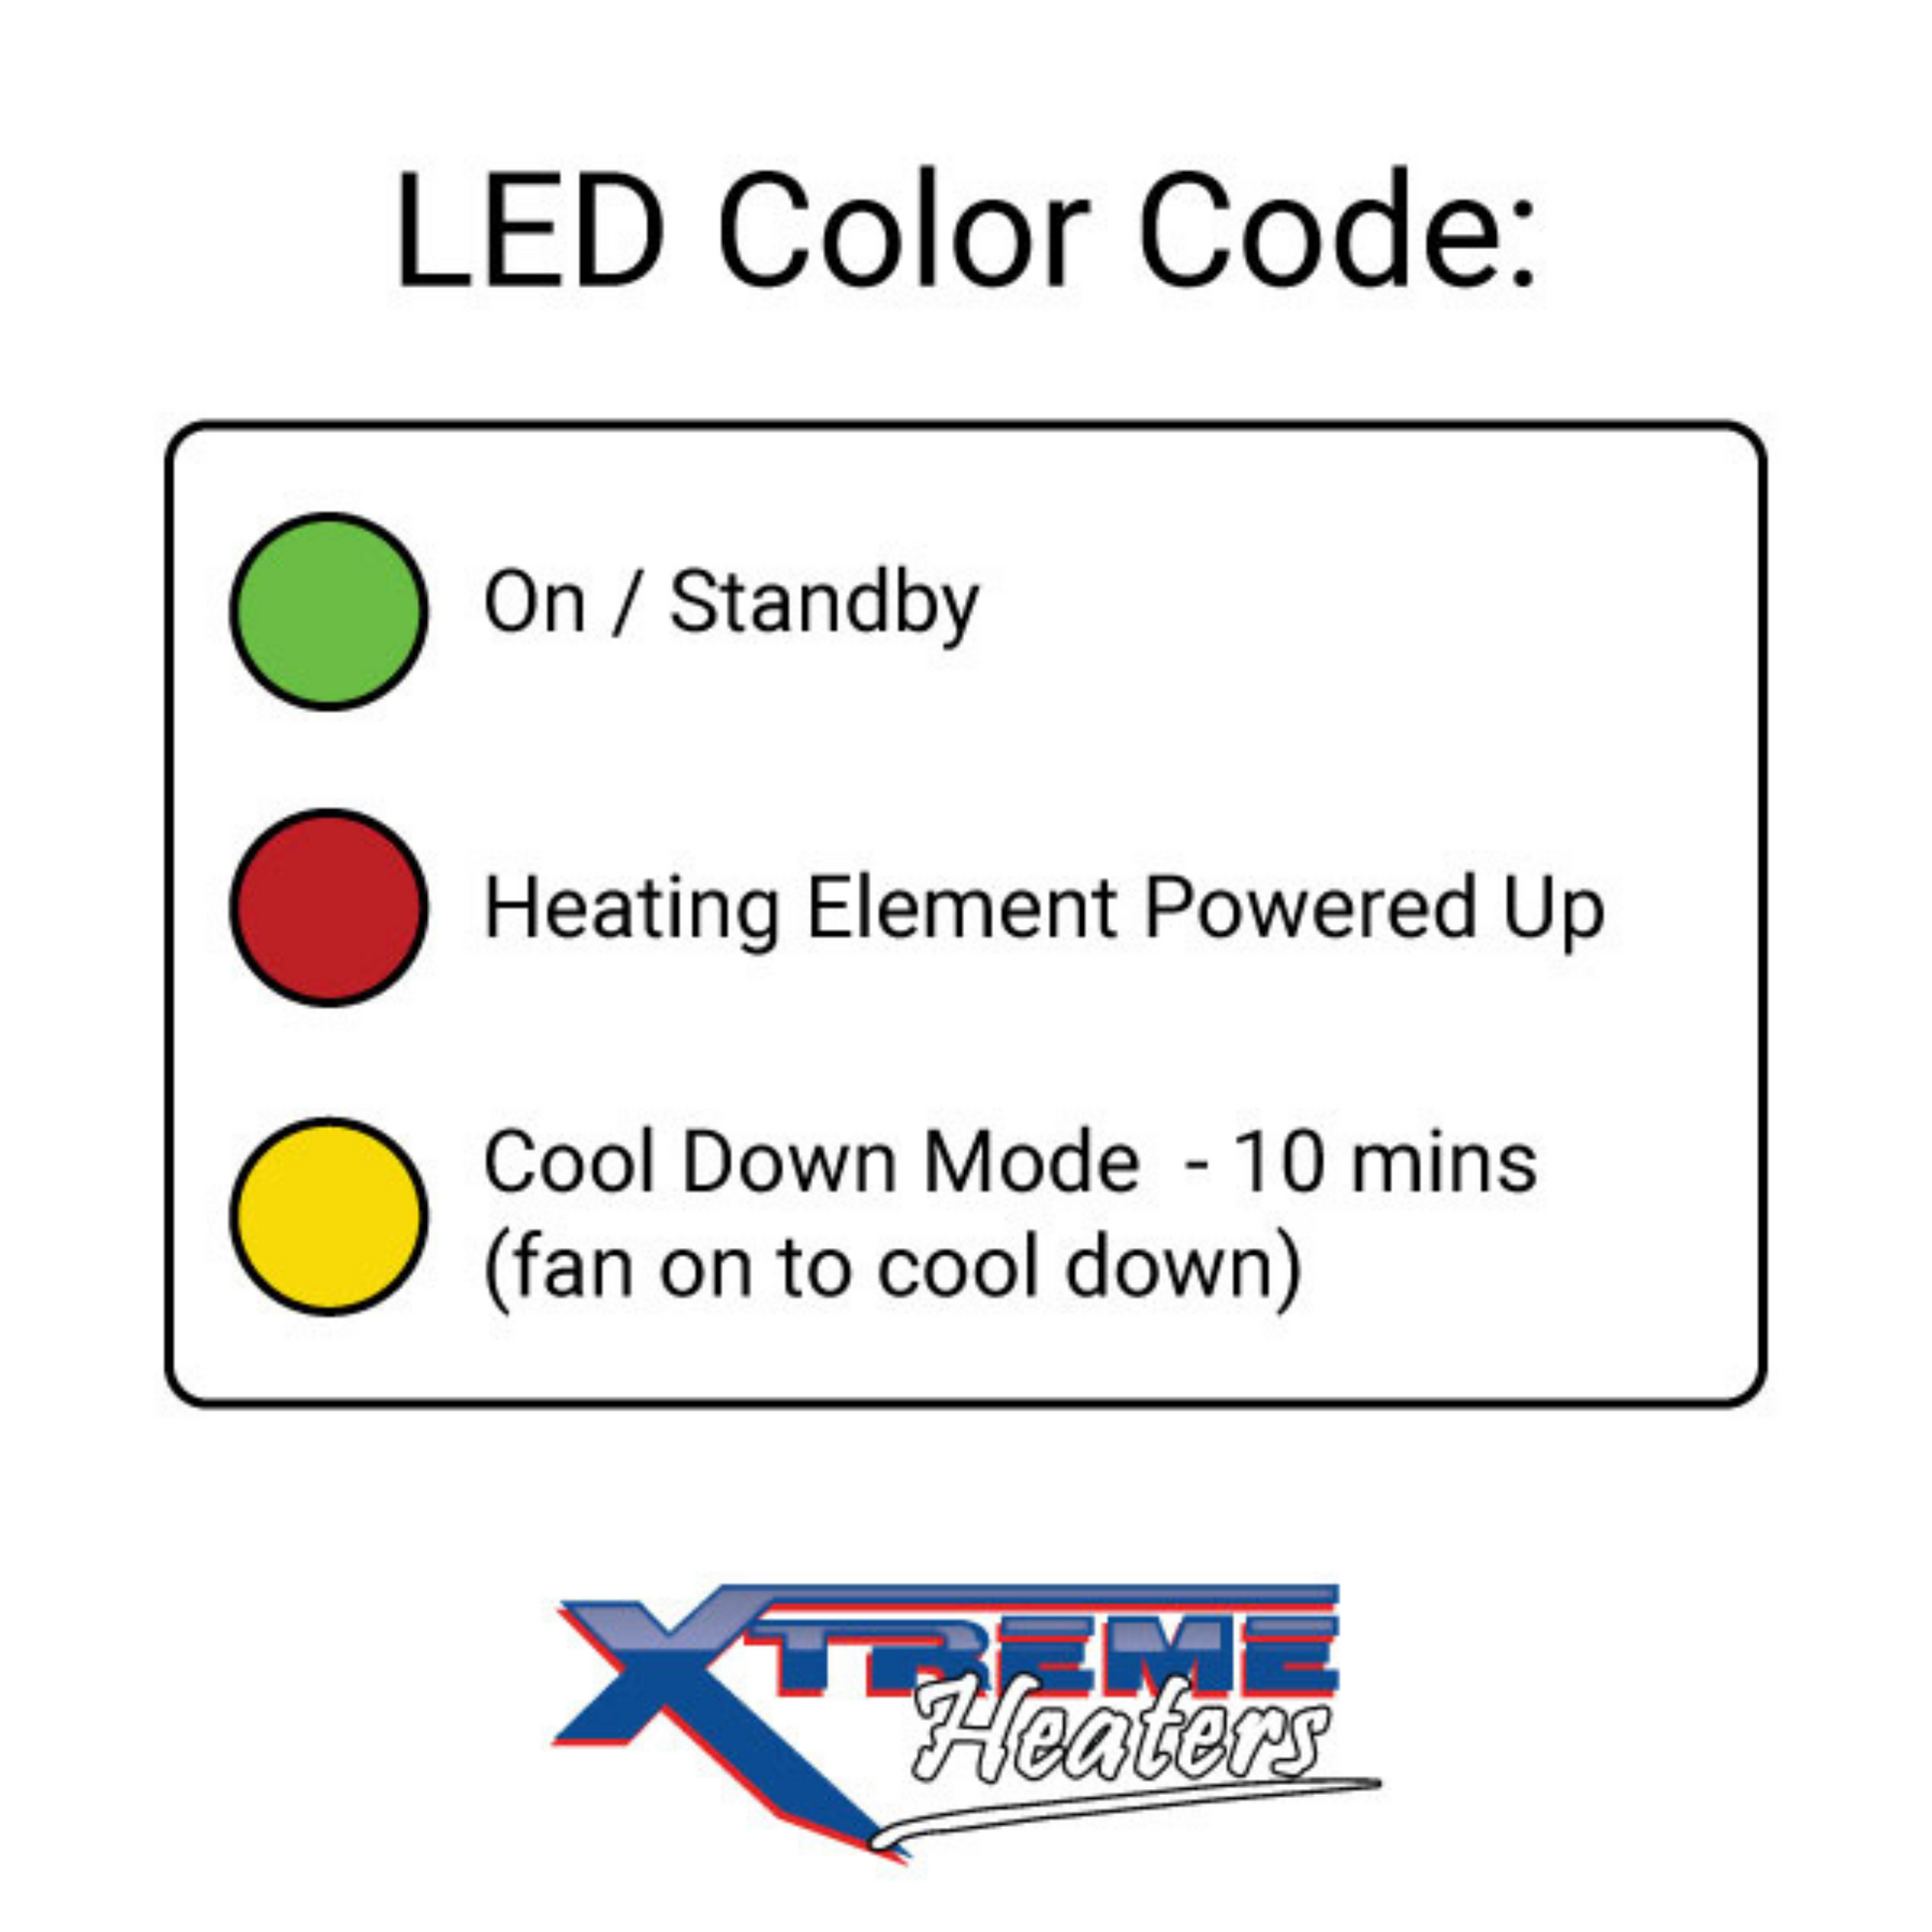 How-the-LED-on-the-back-of-Xtreme-Heaters-works